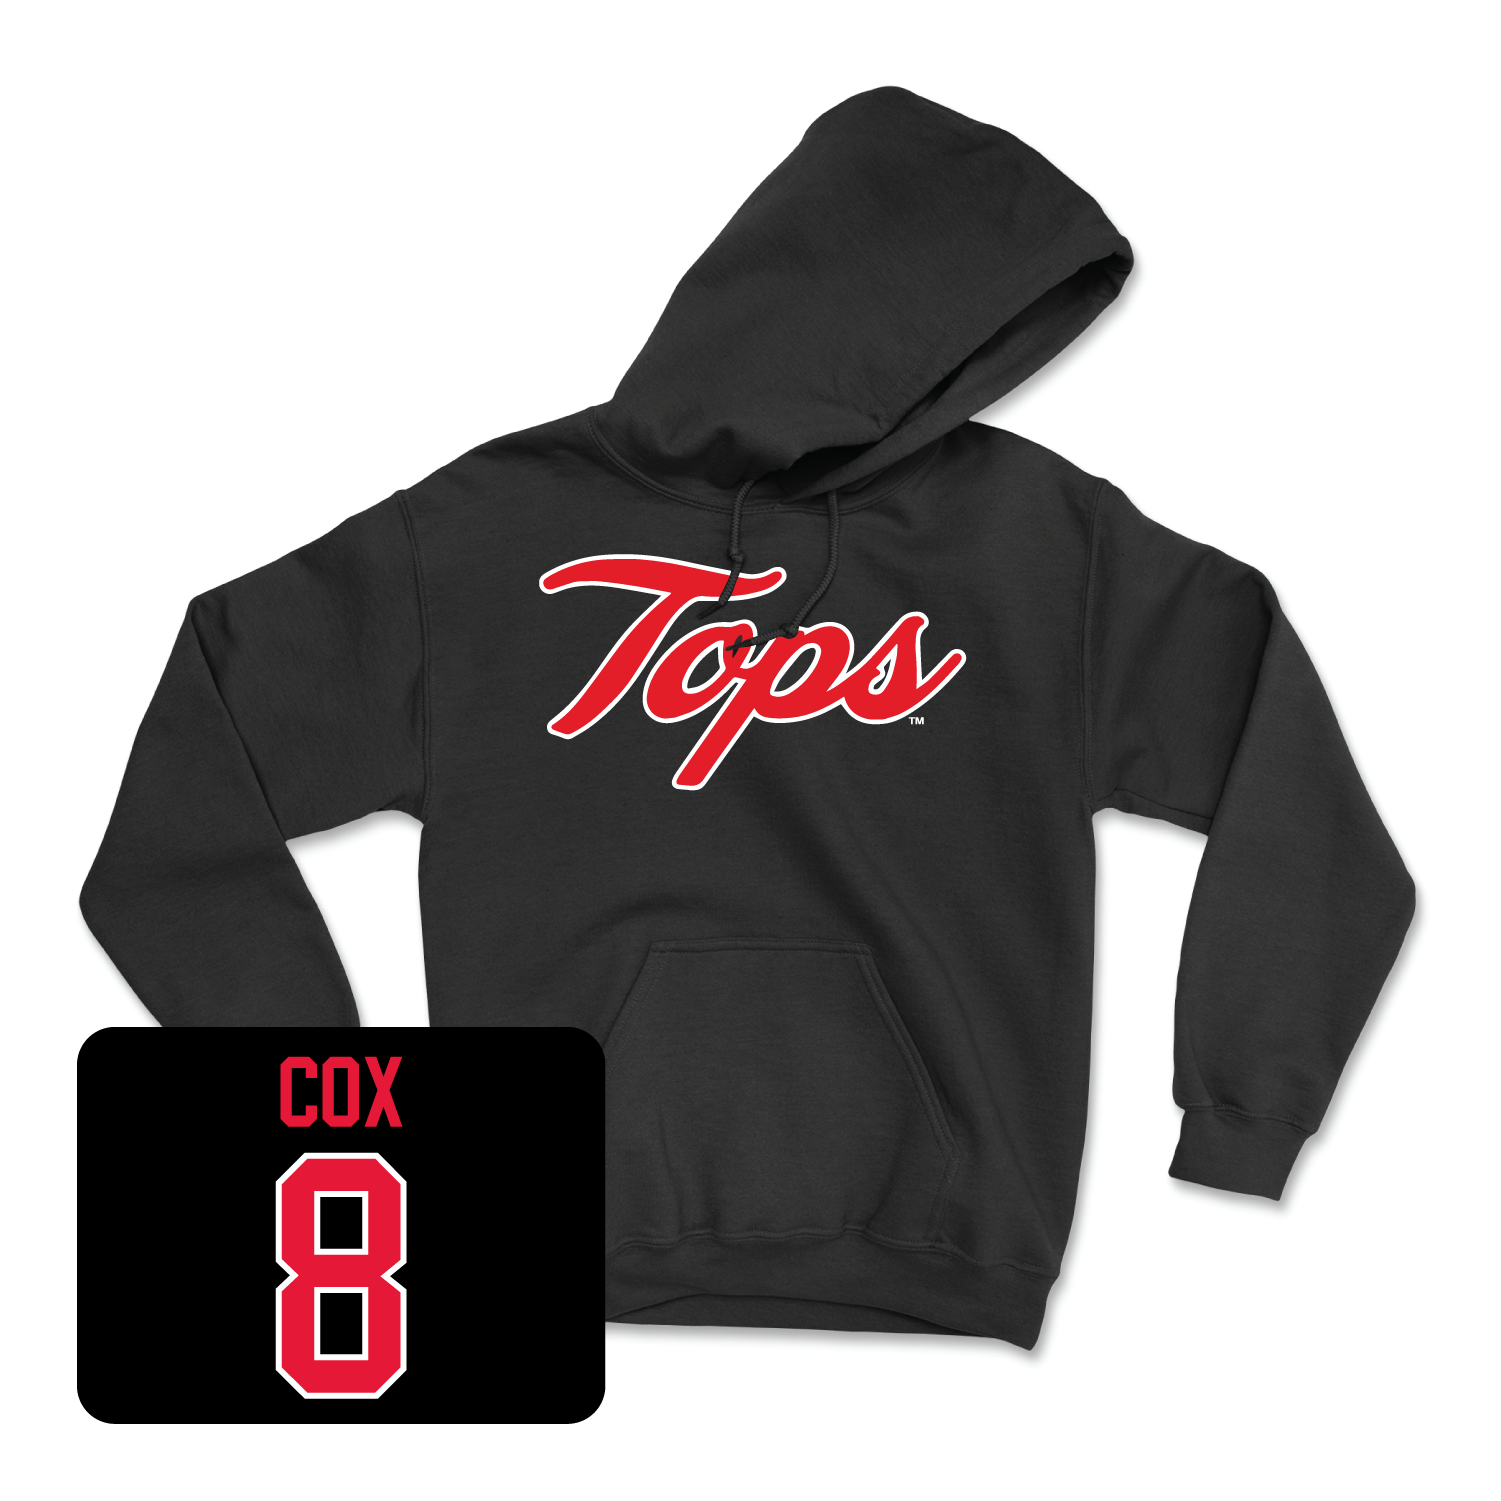 Black Women's Volleyball Tops Hoodie Youth Small / Kaylee Cox | #8